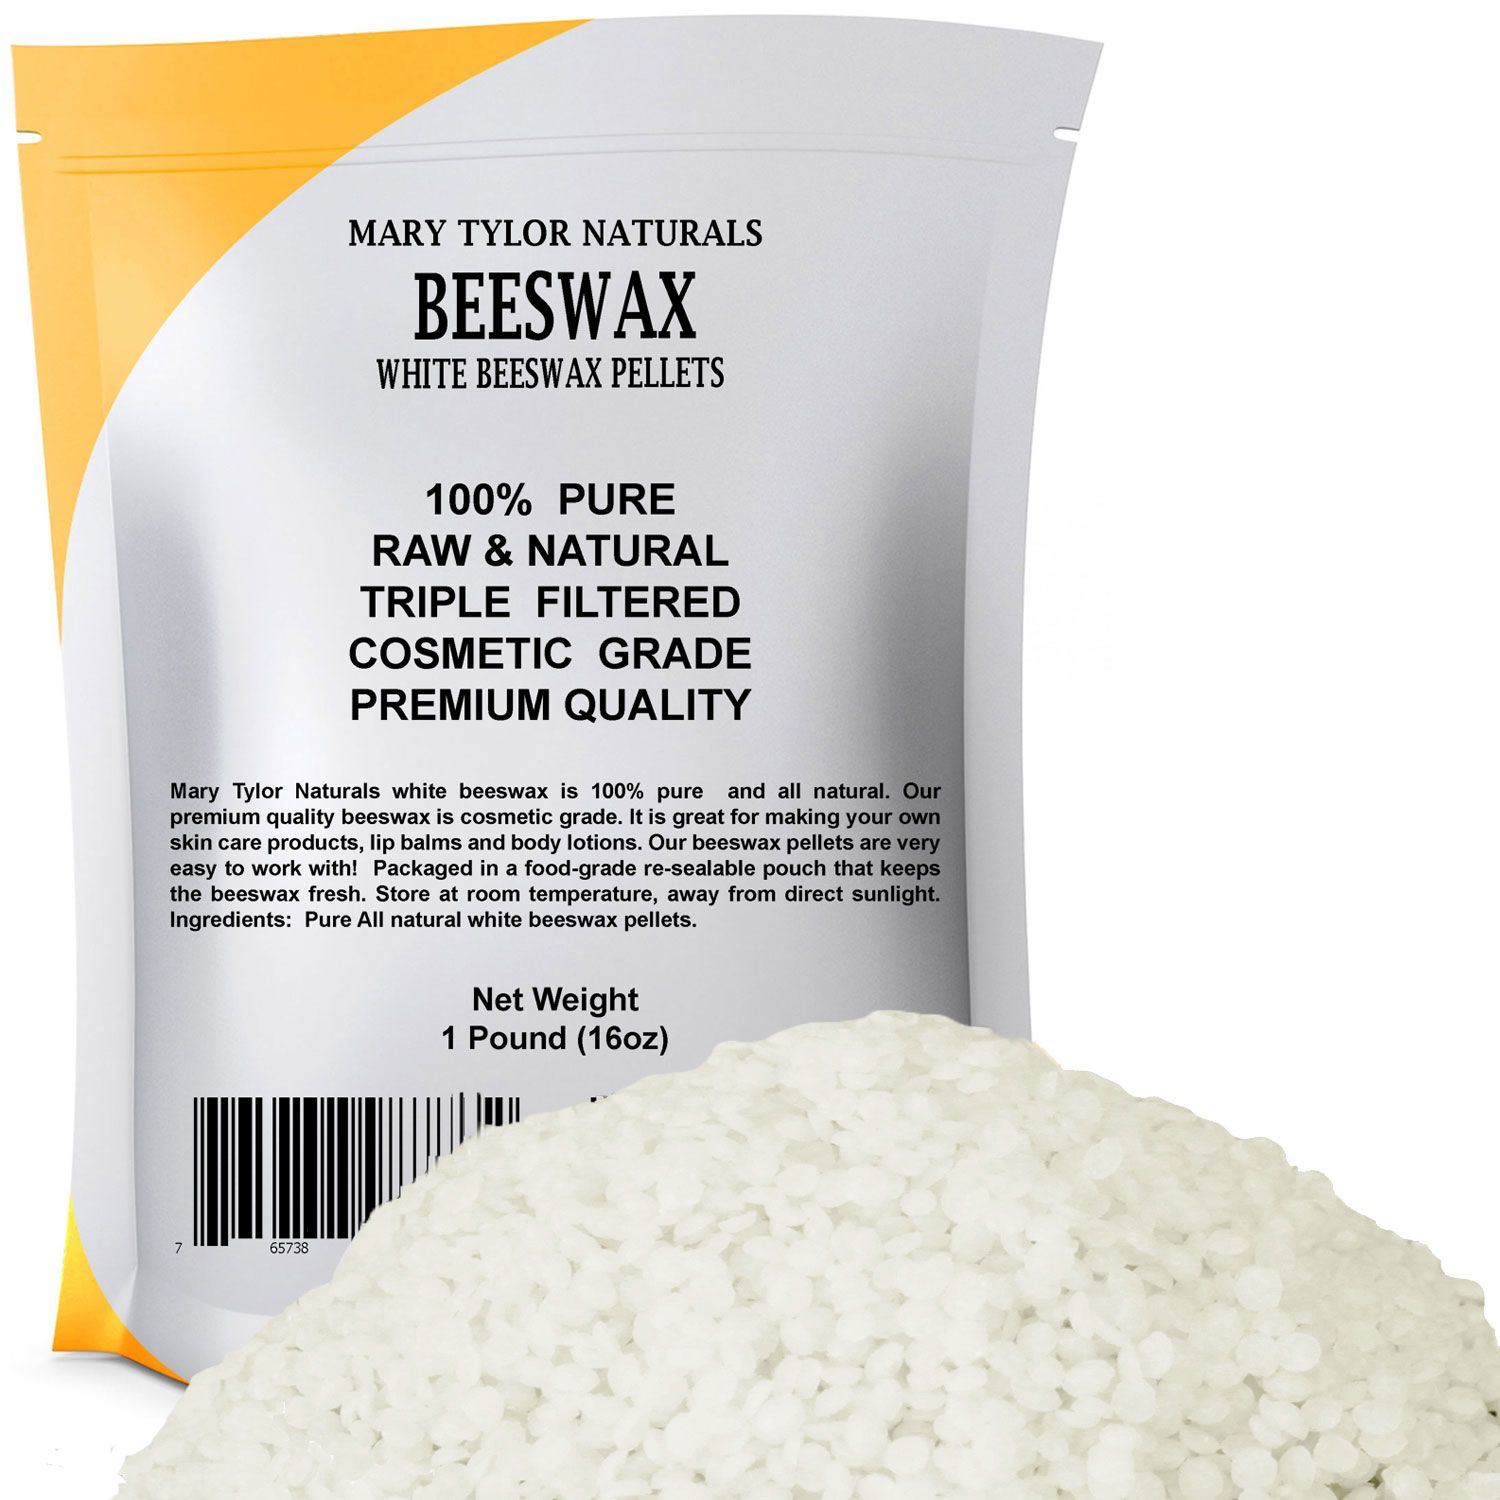 White Beeswax Organic Pastilles Pure 3 LB